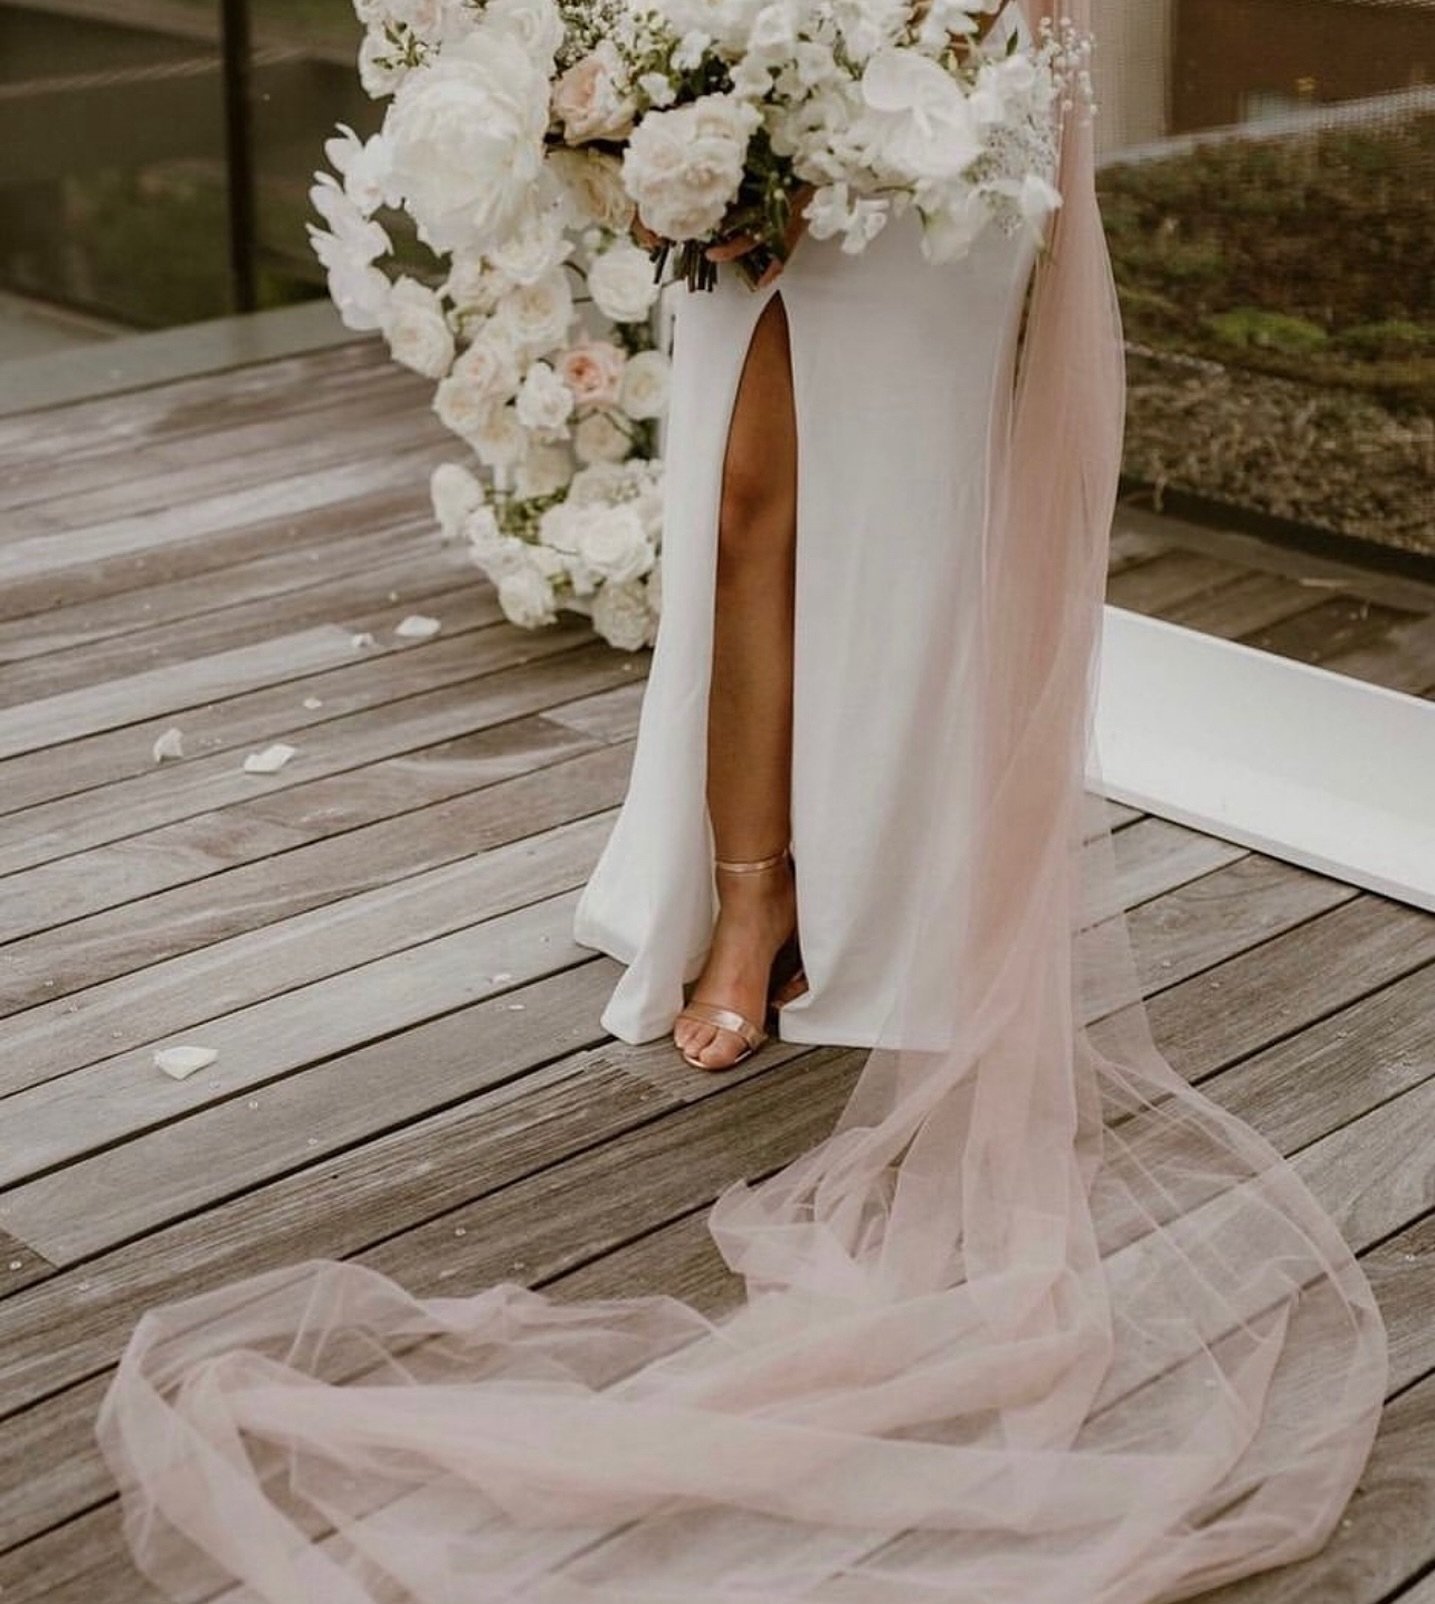 A shout out to all the non traditional brides and wow, just look at that veil!!!!
What ways are you making your wedding day spectacular and uniquely you???
Let us know in the comments - we want to hear about it.
#FeelGoodWeddings #AustralianWeddings 